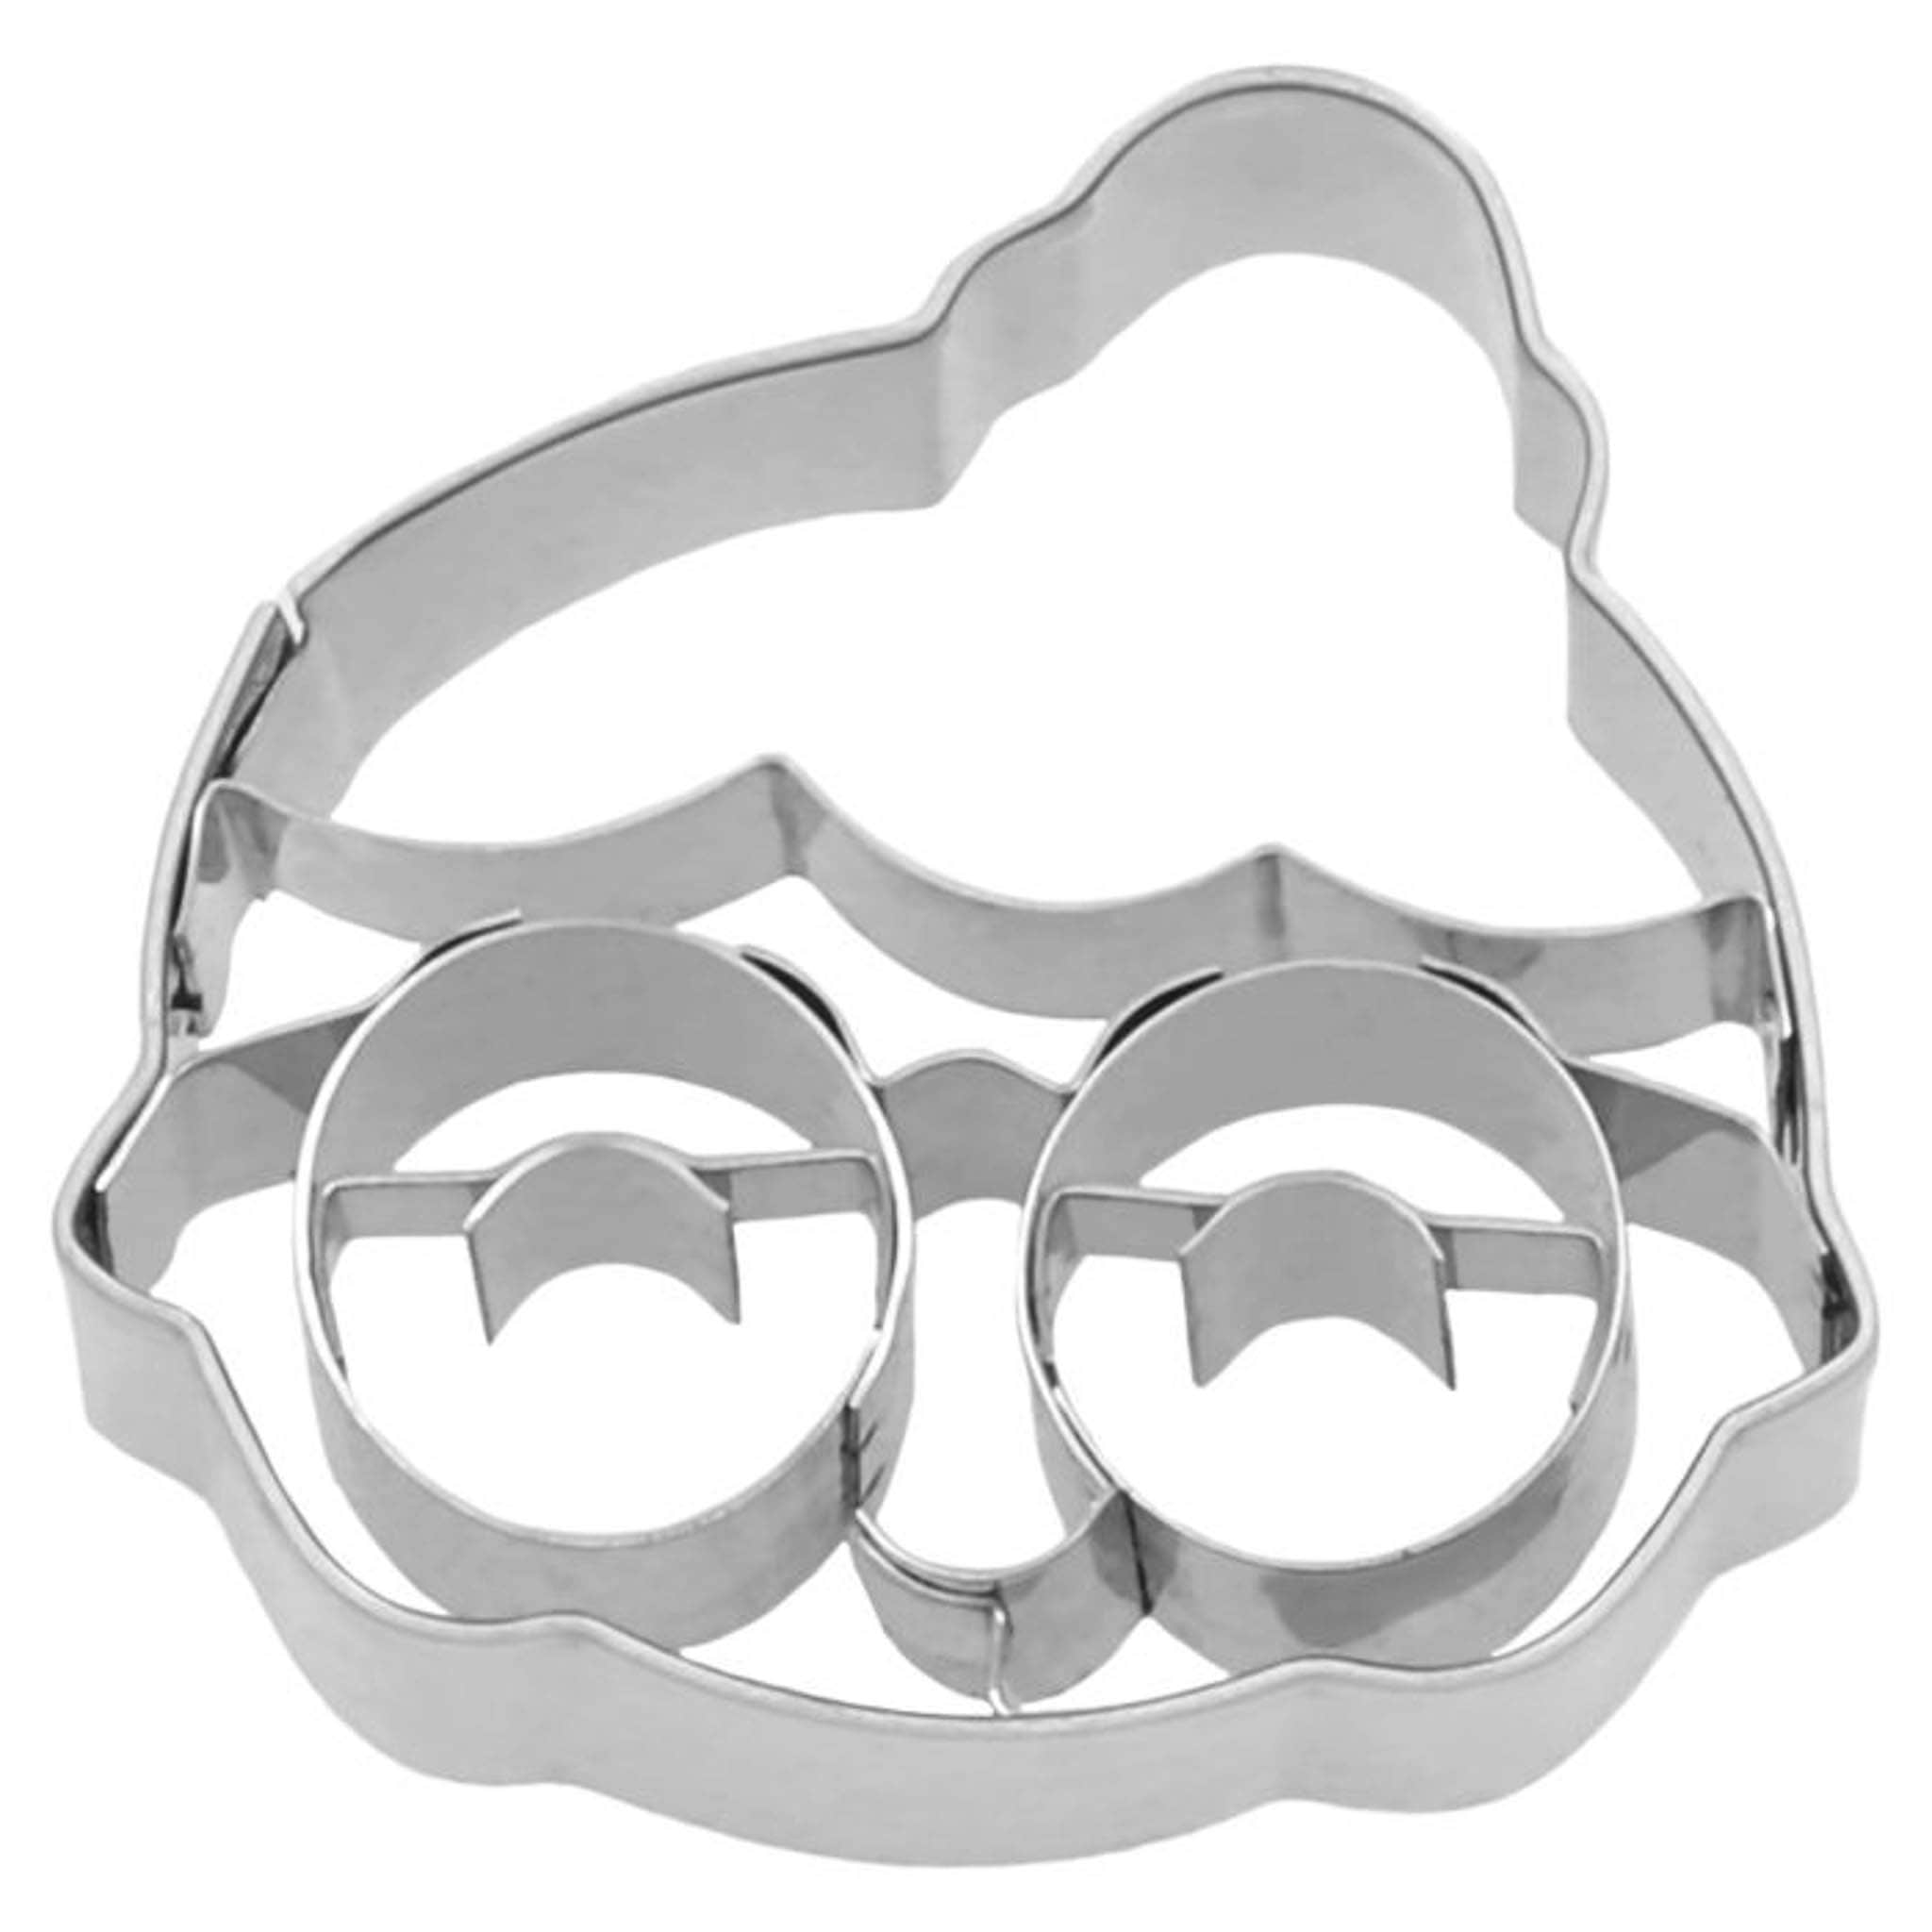 Stainless Steel Mrs. Claus Cookie Cutter, 5cm